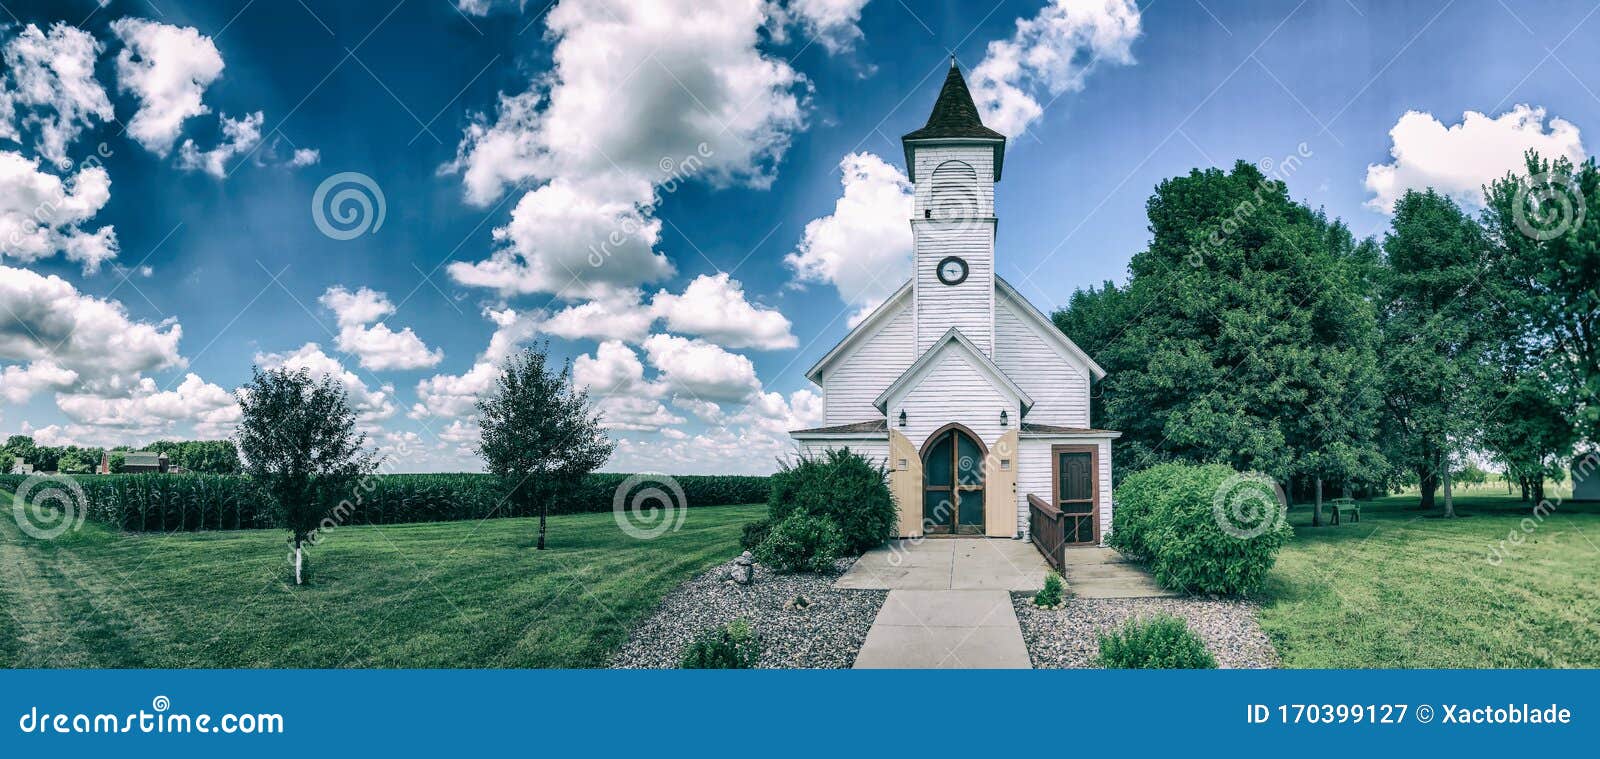 Ancient Church Of Blue Color In Village Stock Photo - Download